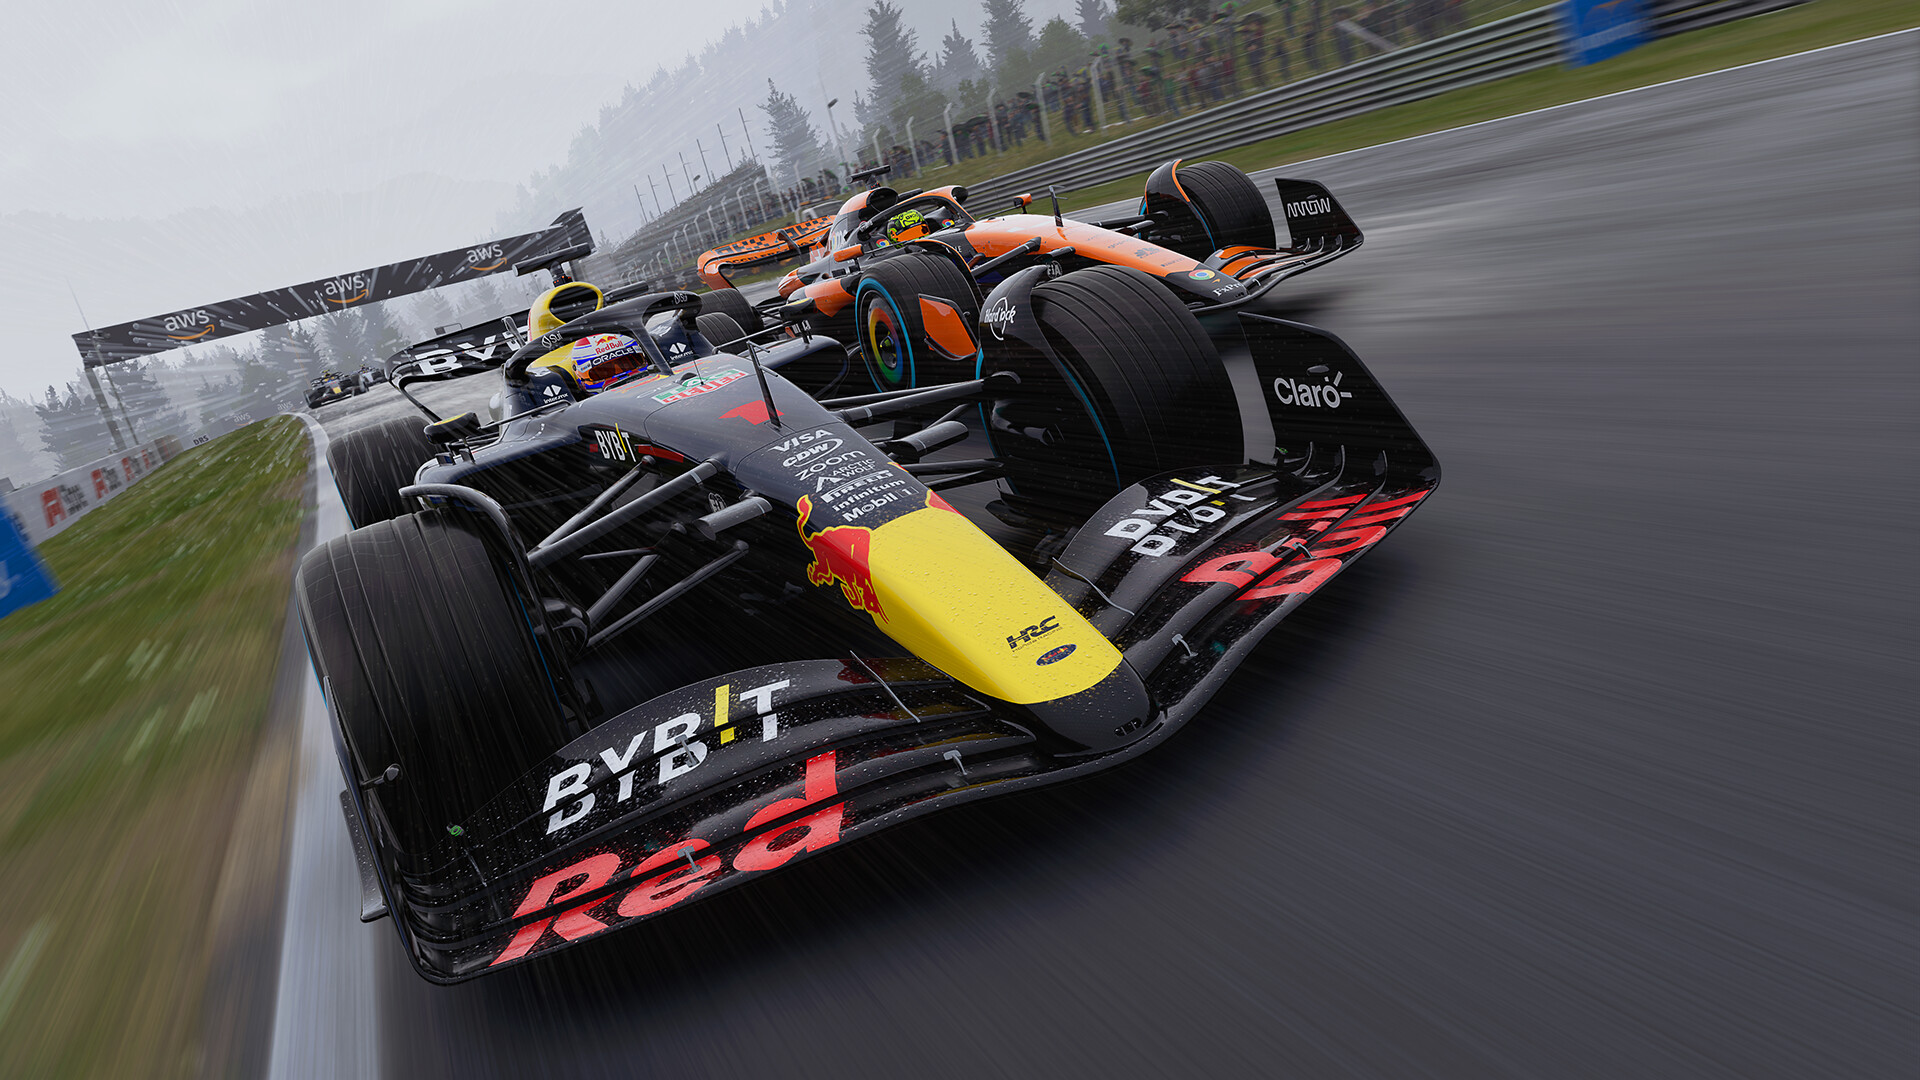 F1 24 Gameplay Deep Dive Details Updated Tyre Model, Aerodynamic Model, Power Unit Settings, and More